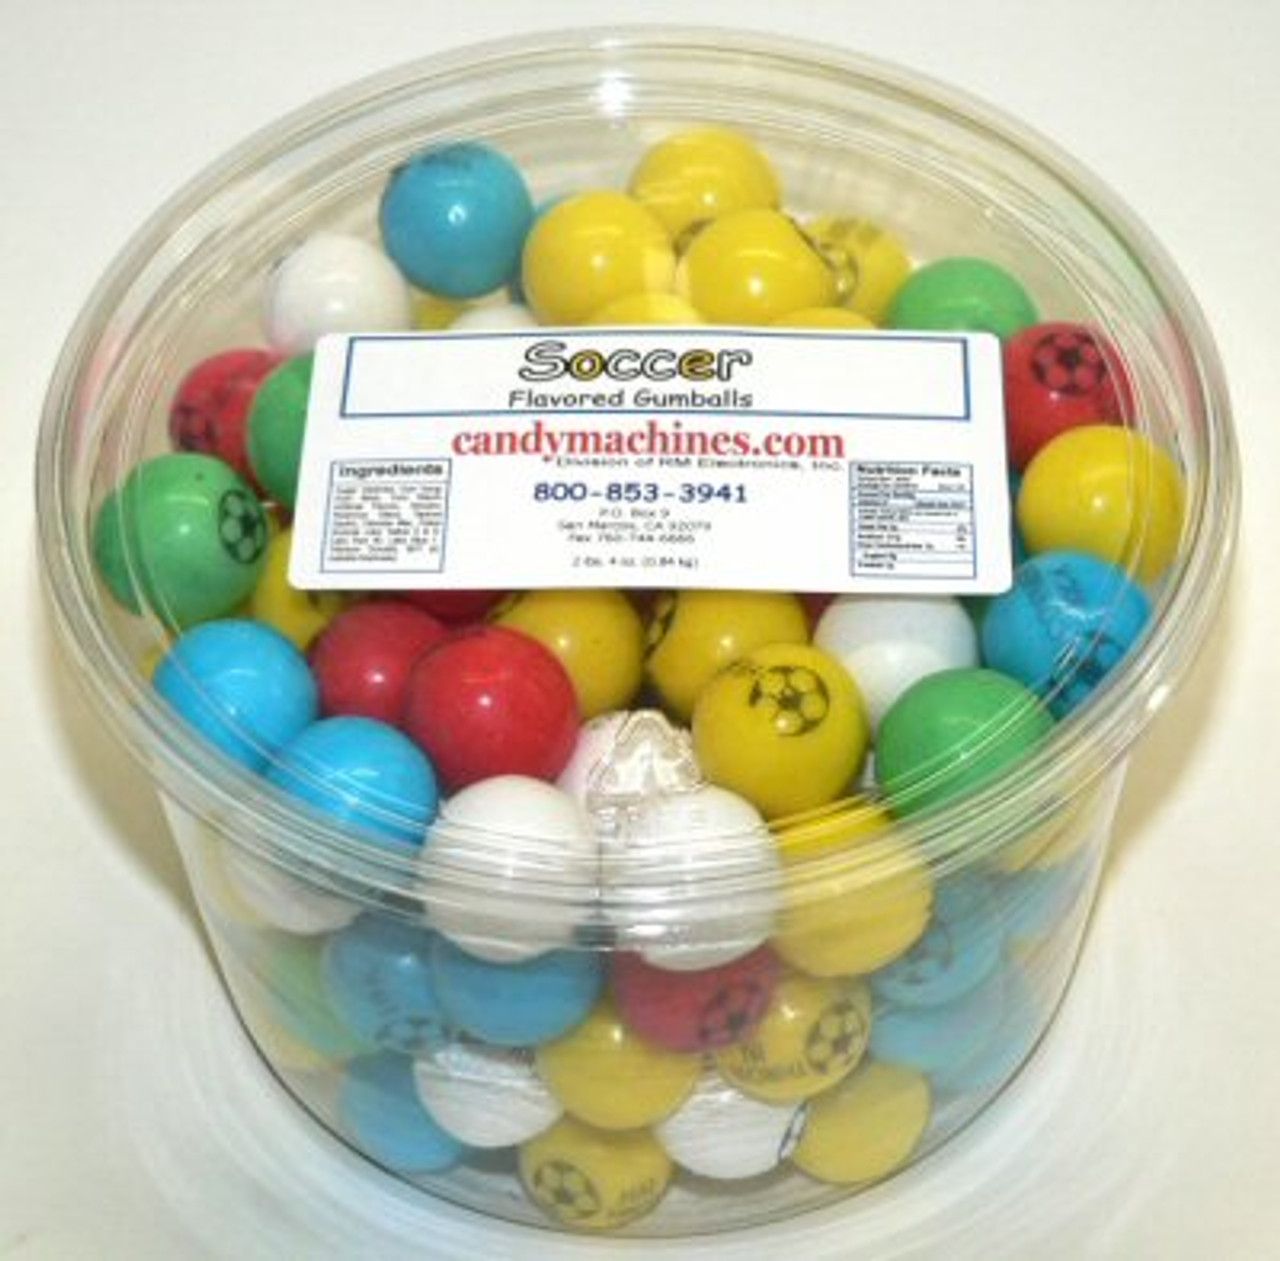 Soccer - Tub of Gumballs - CandyMachines.com